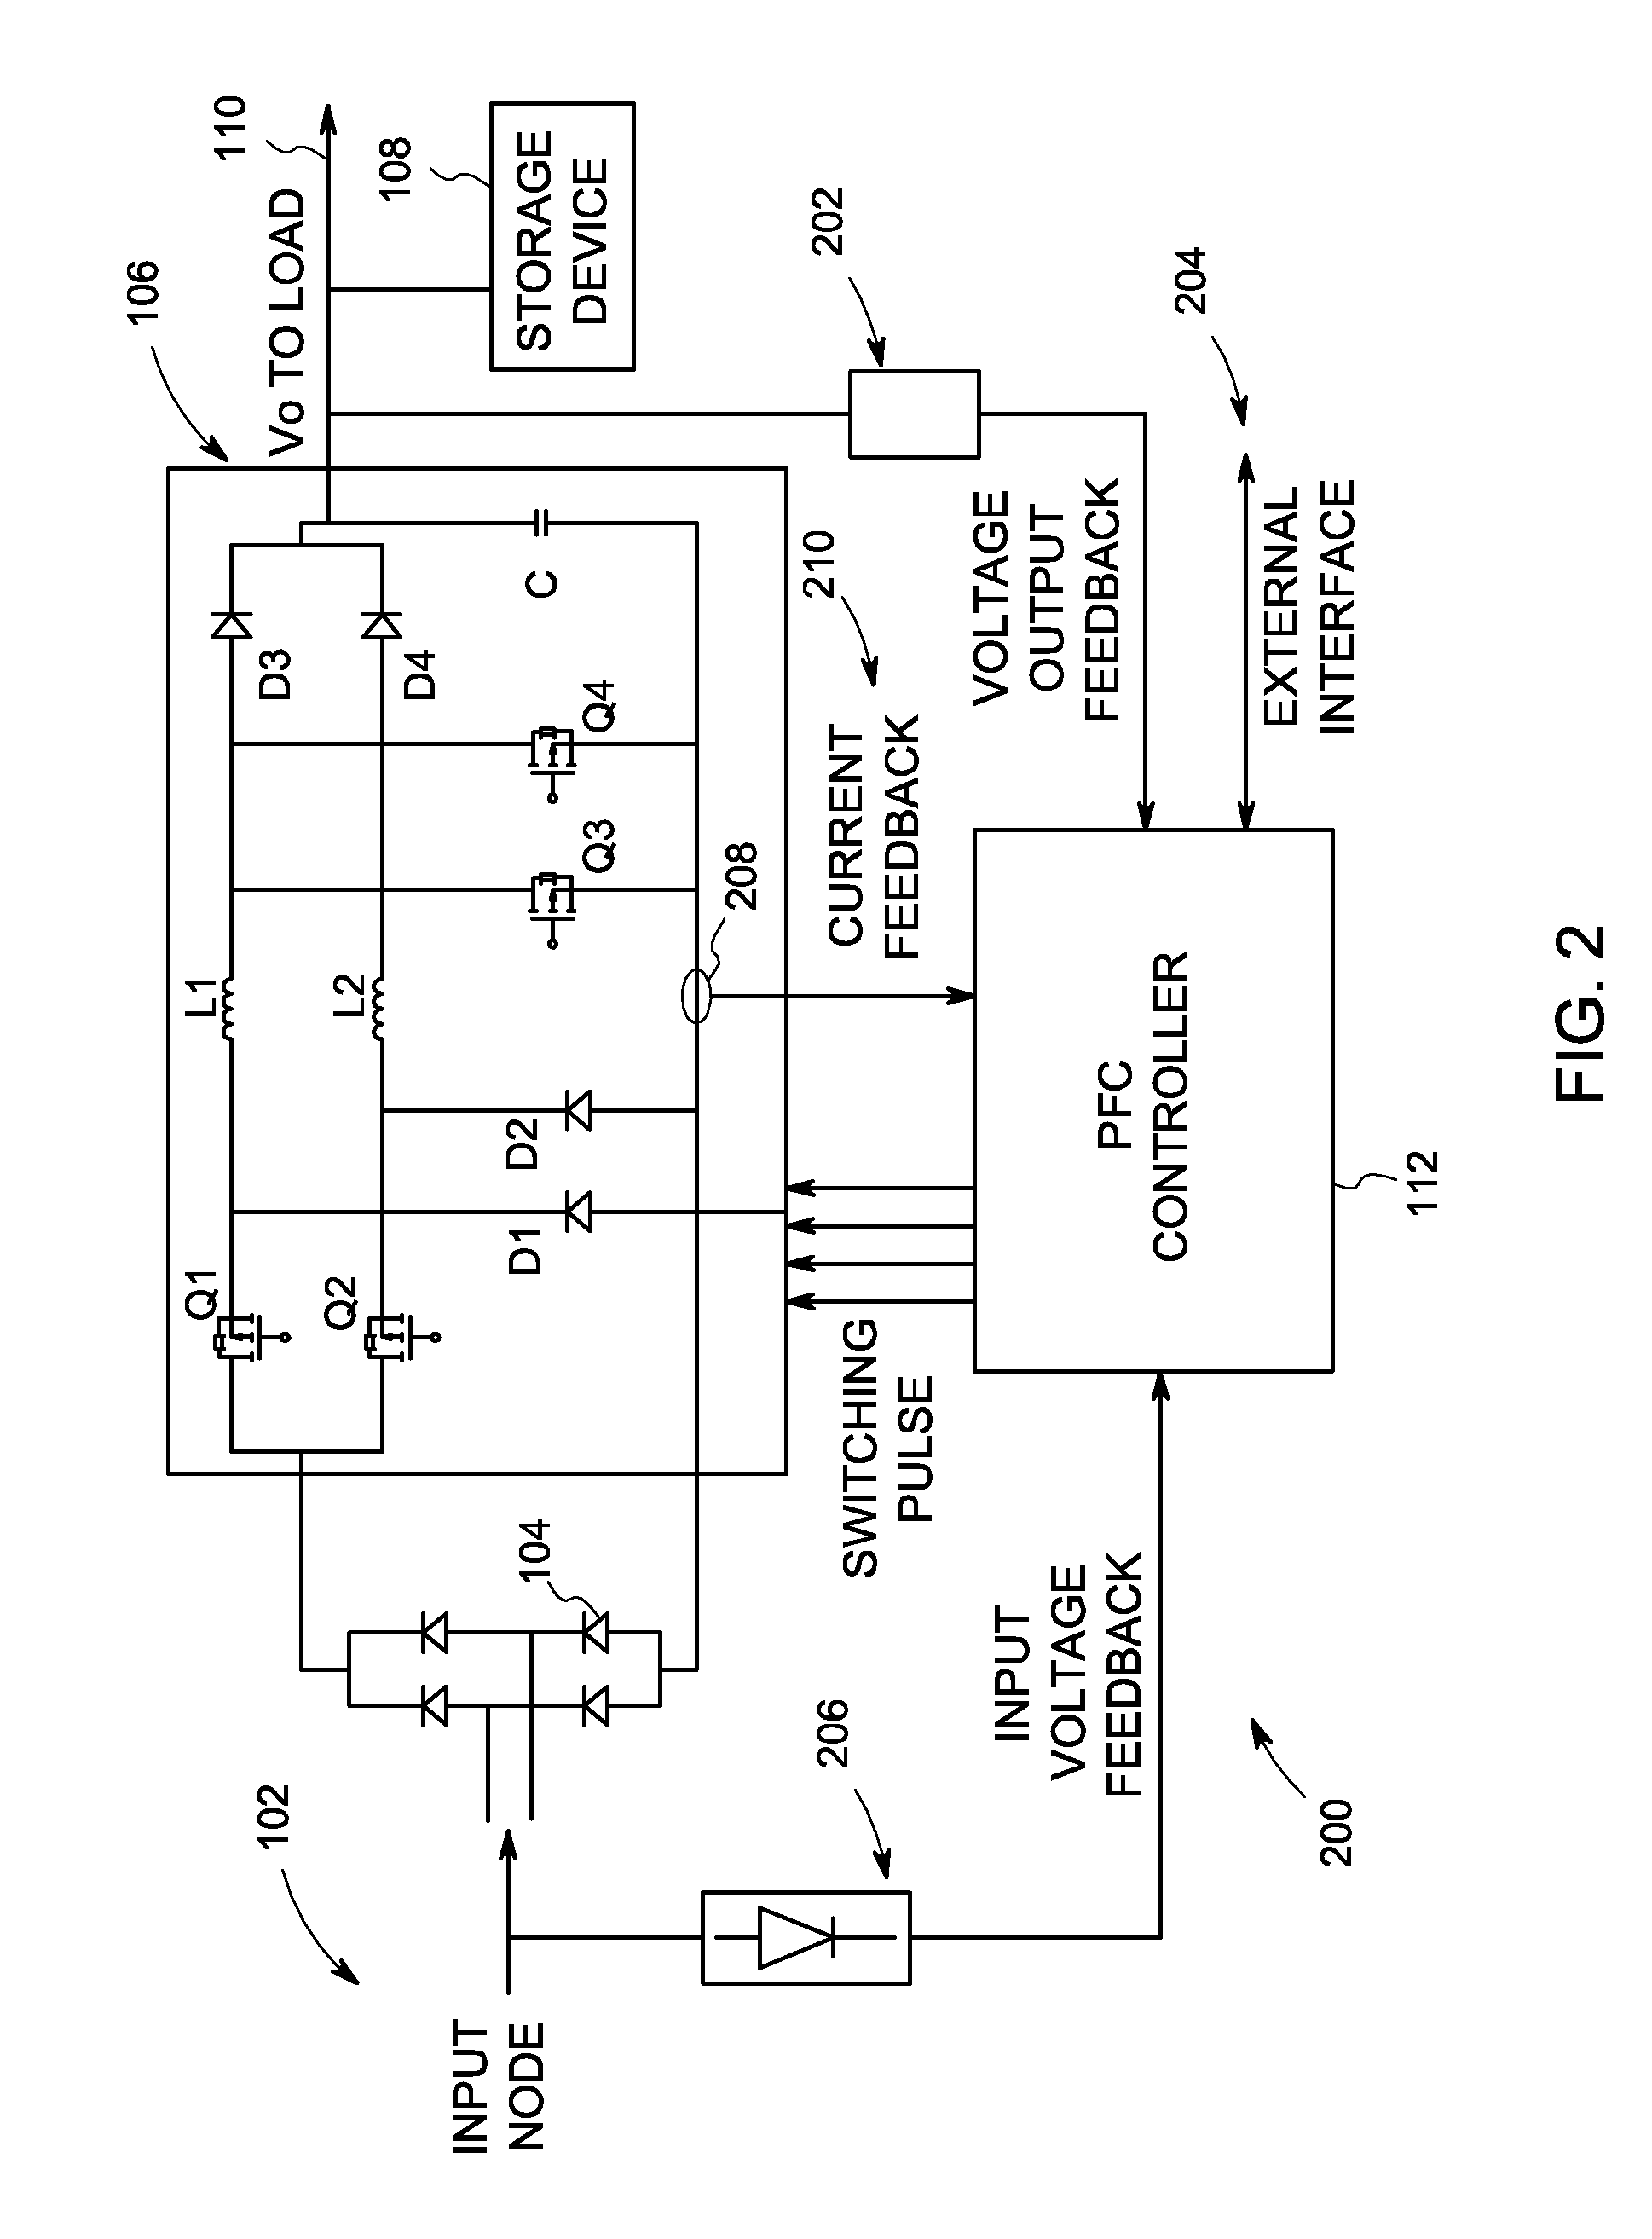 Power factor correction (PFC) circuit configured to control high pulse load current and inrush current